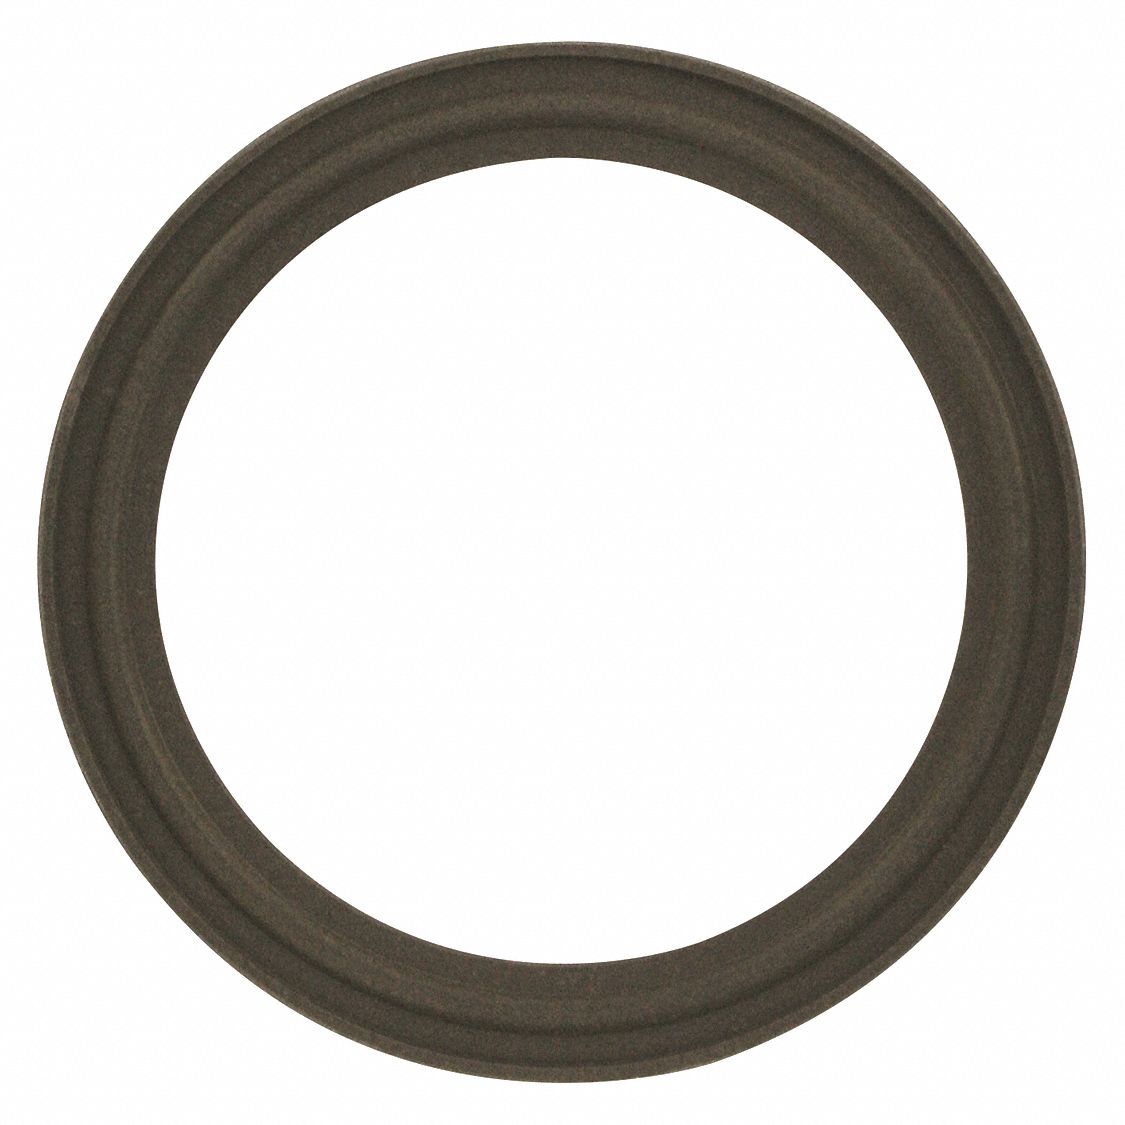 Gasket: 4 in Tube Size, 3.875 in Inside Dia., 5 in Outside Dia., 1/64 in Thick